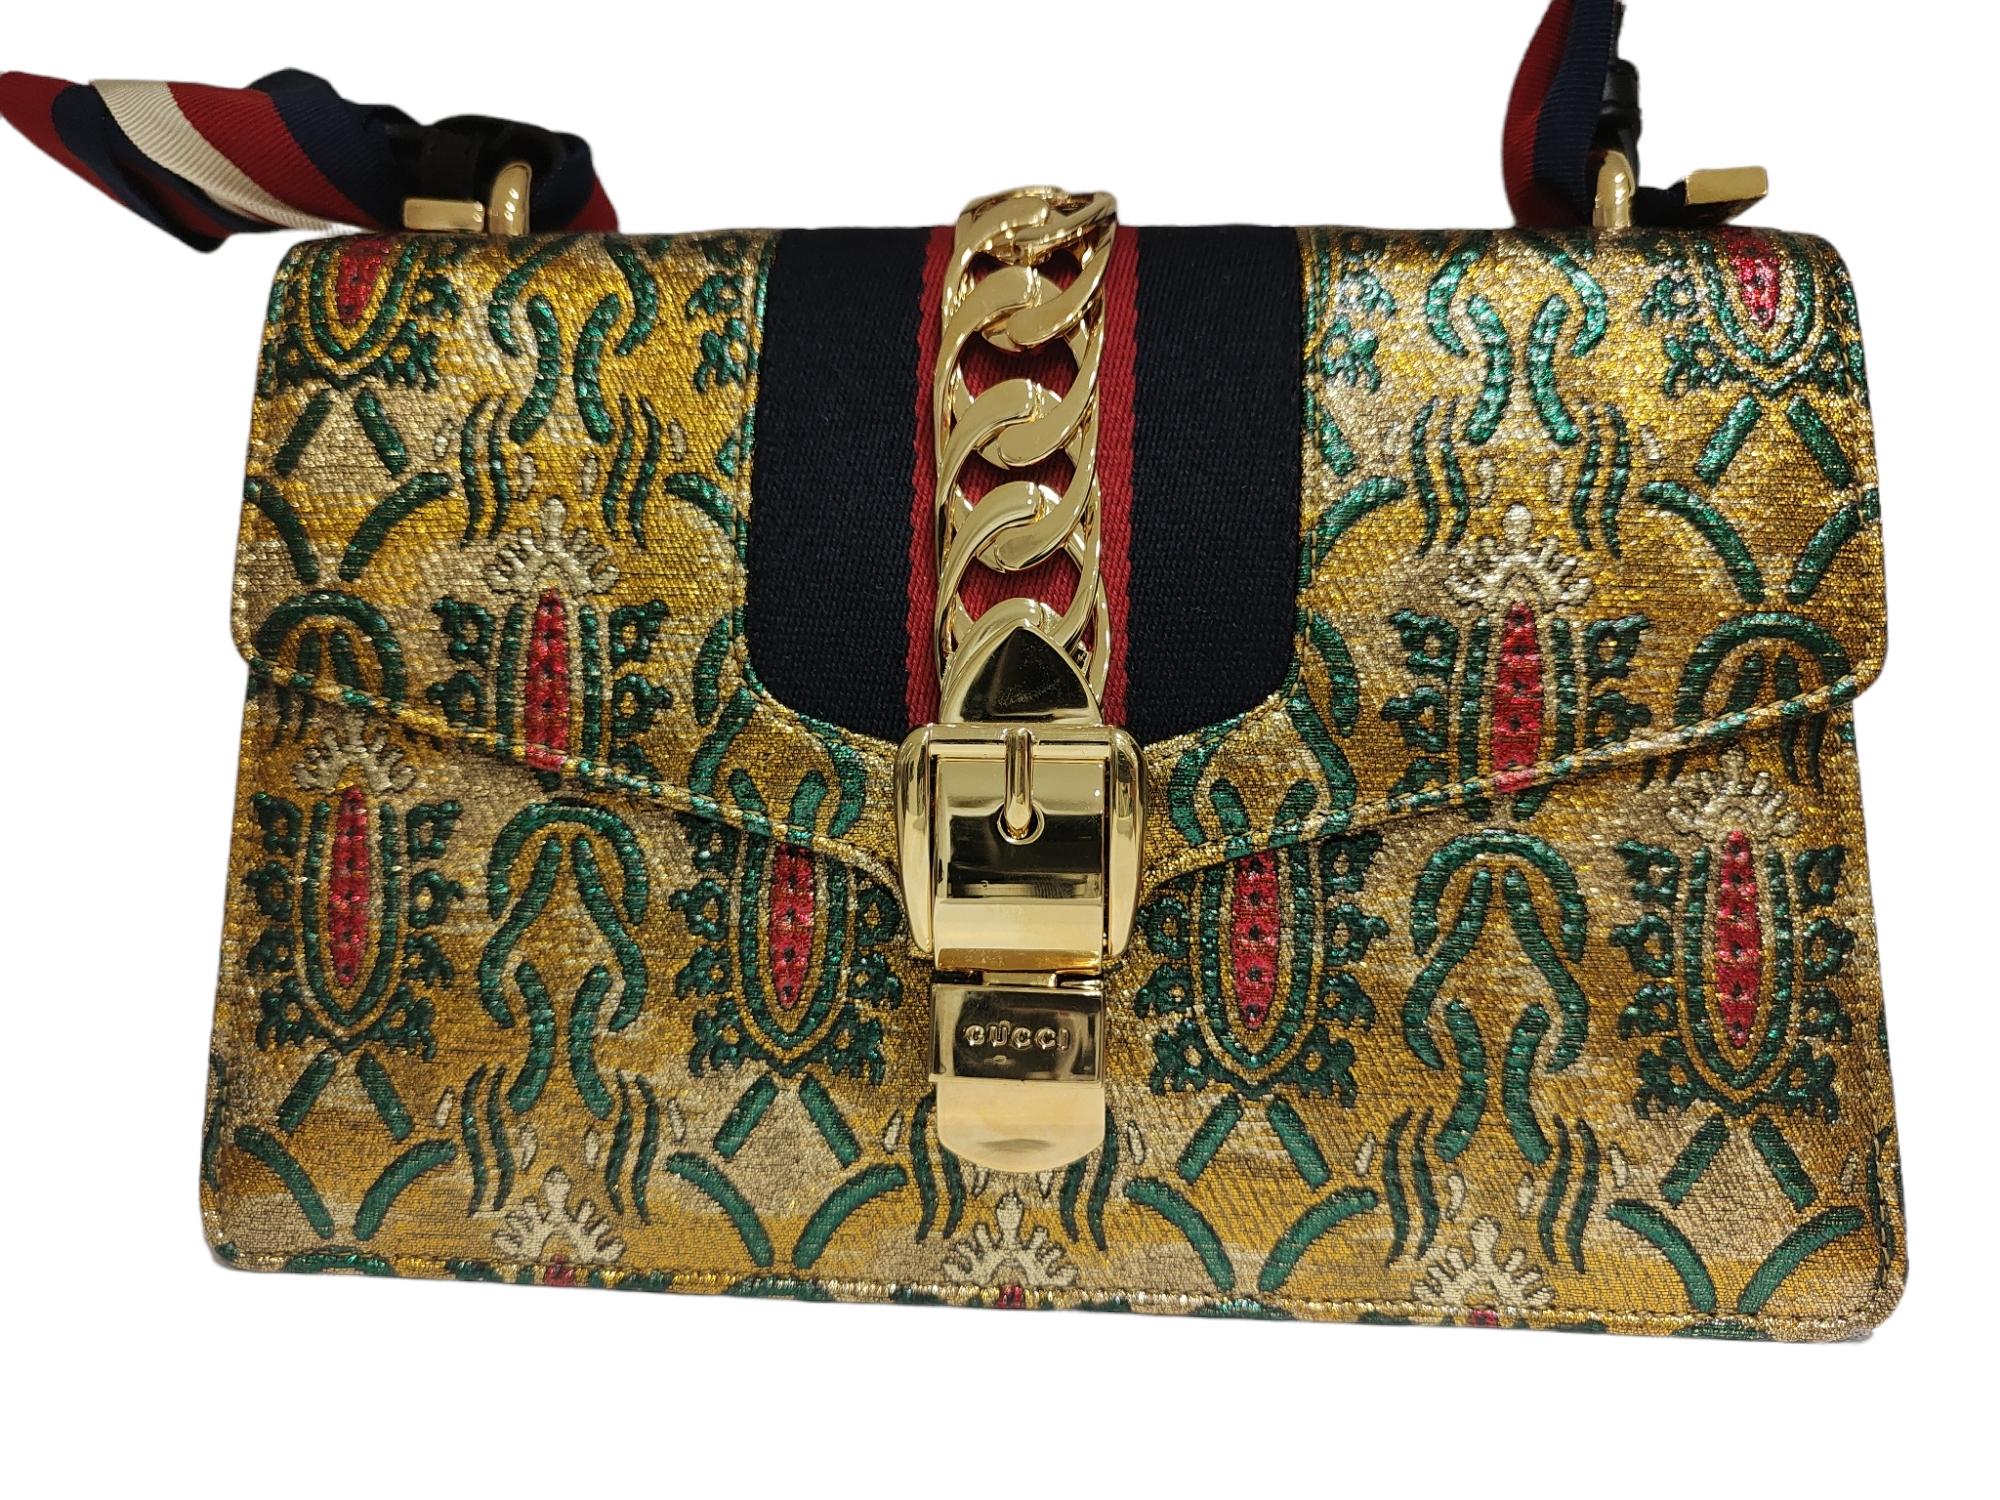 Gucci Sylvie bag Limited edition
new with original tag
multicoloured fabric, embellished with gold hardware a black leather shoulder bag and a scarf for handle bag
totally made in italy
measurements: 26 * 17 cm, 8 cm depth